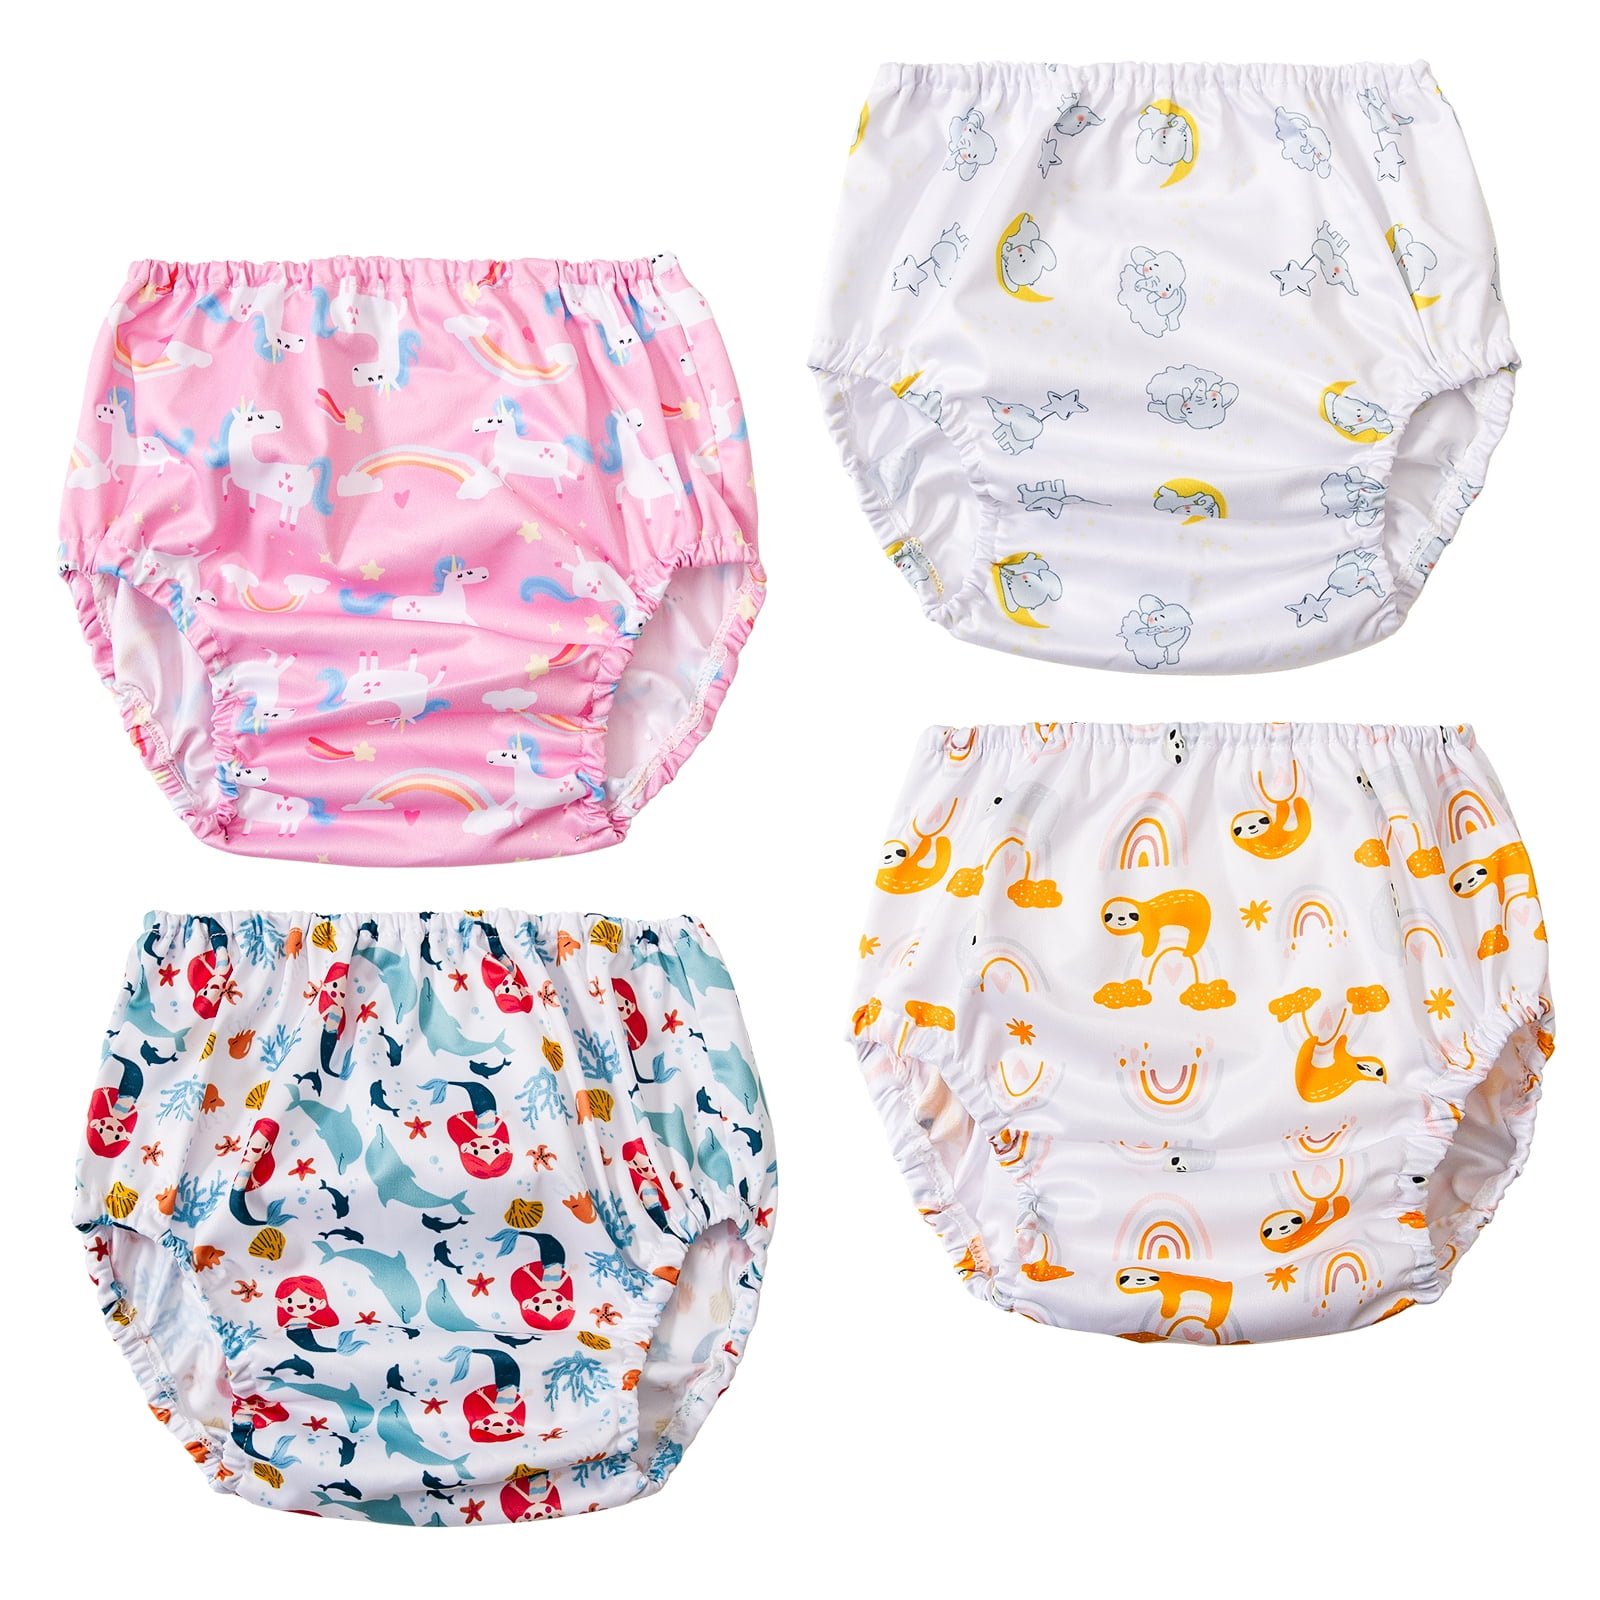 Plastic Underwear Covers for Potty Training Rubber Pants For